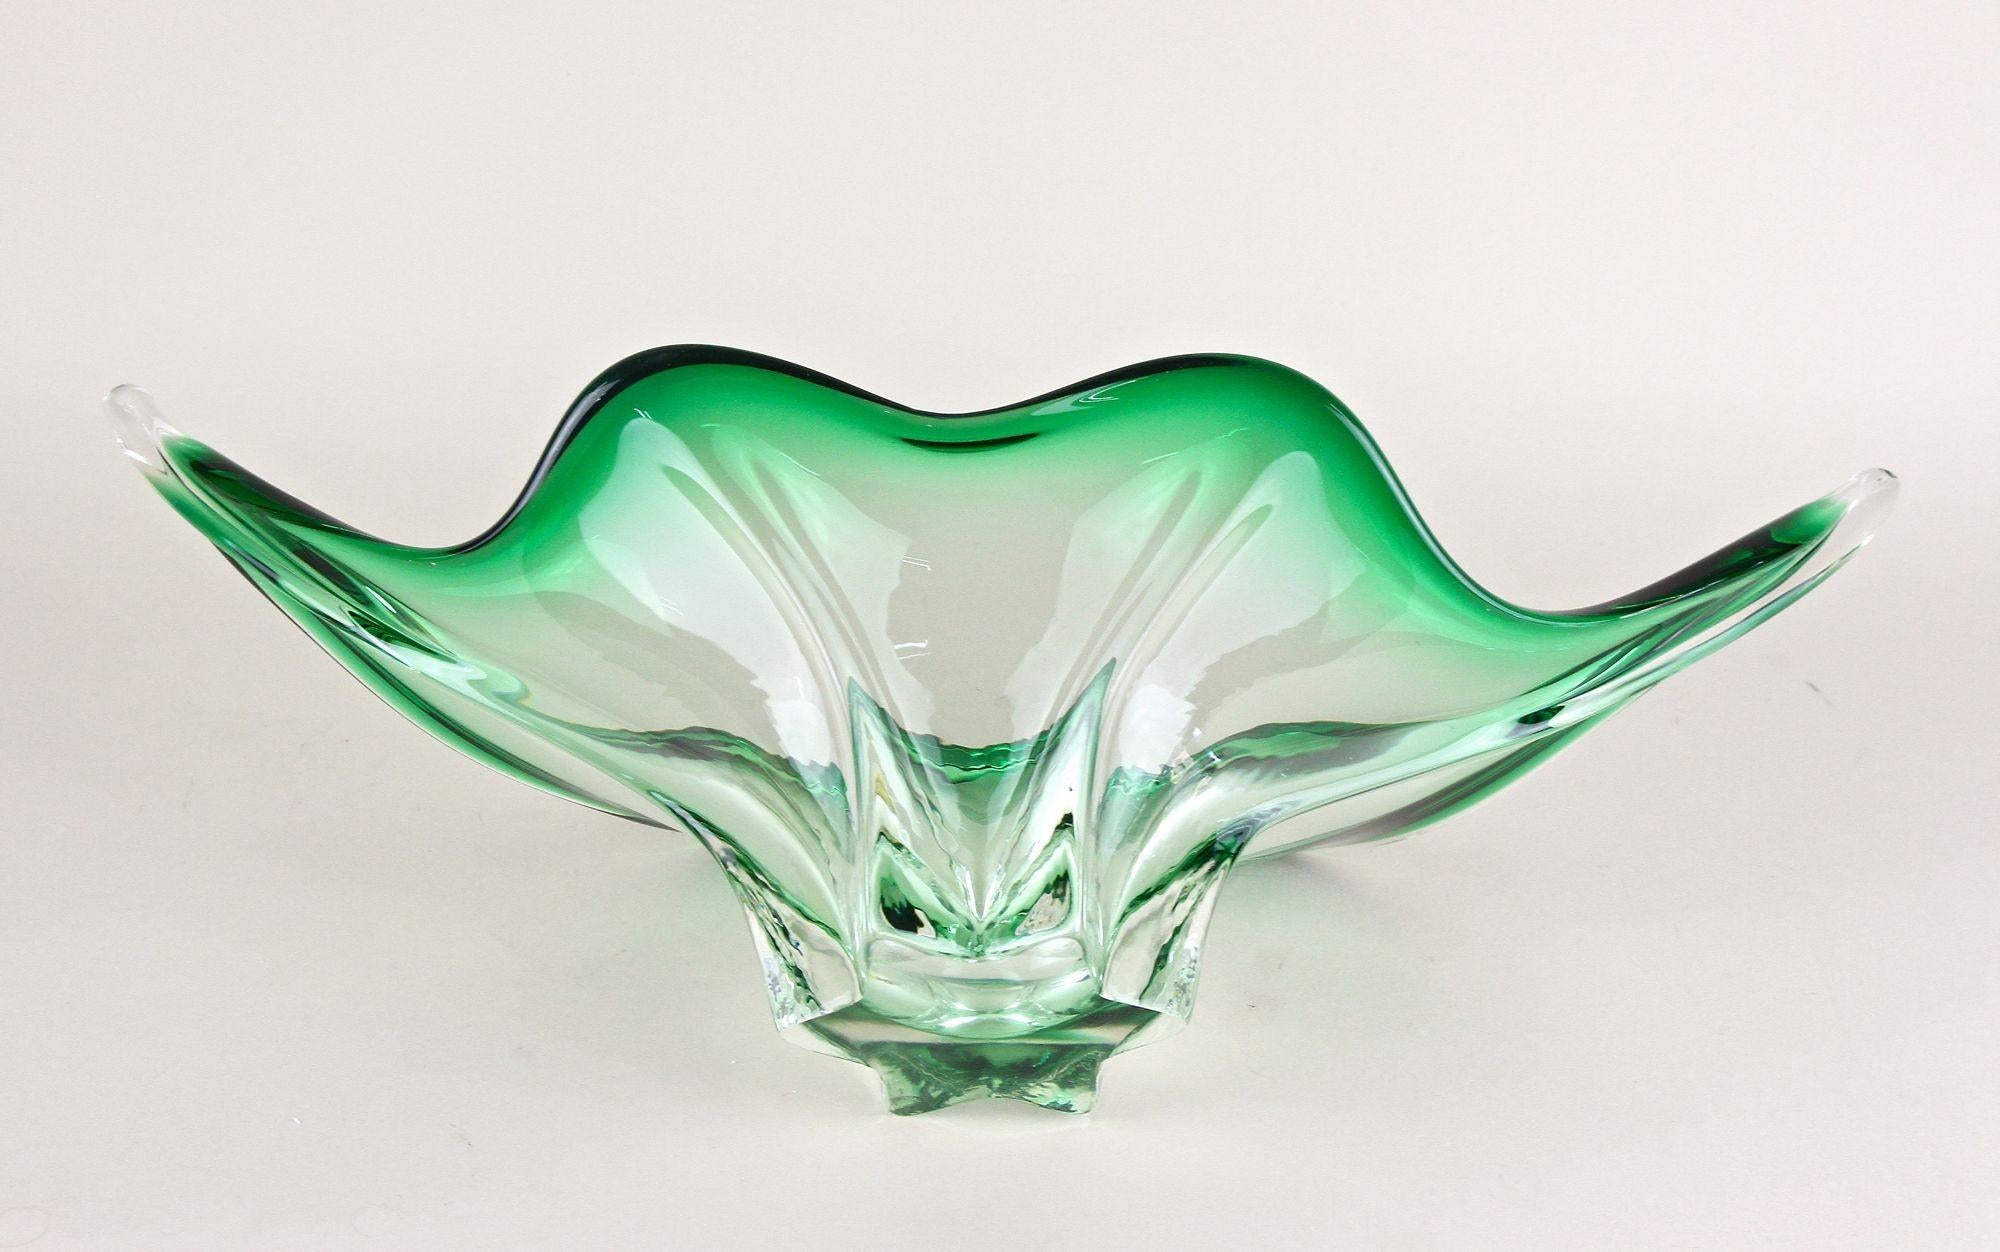 Mid Century Modern Murano Glass Bowl, Green/ Clear Tones - Italy ca. 1960 For Sale 5